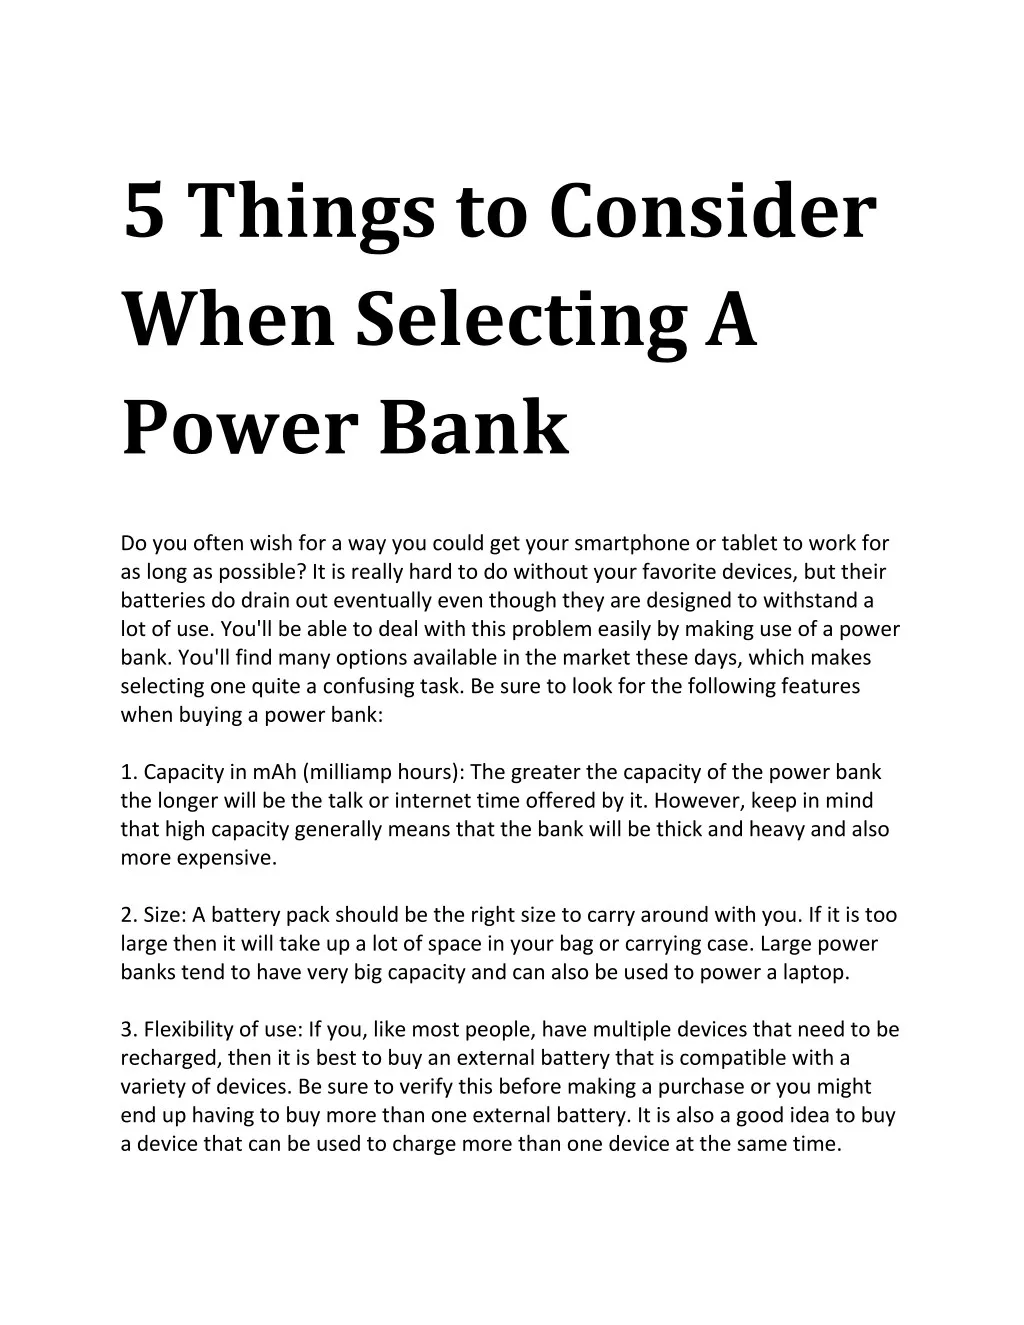 5 things to consider when selecting a power bank